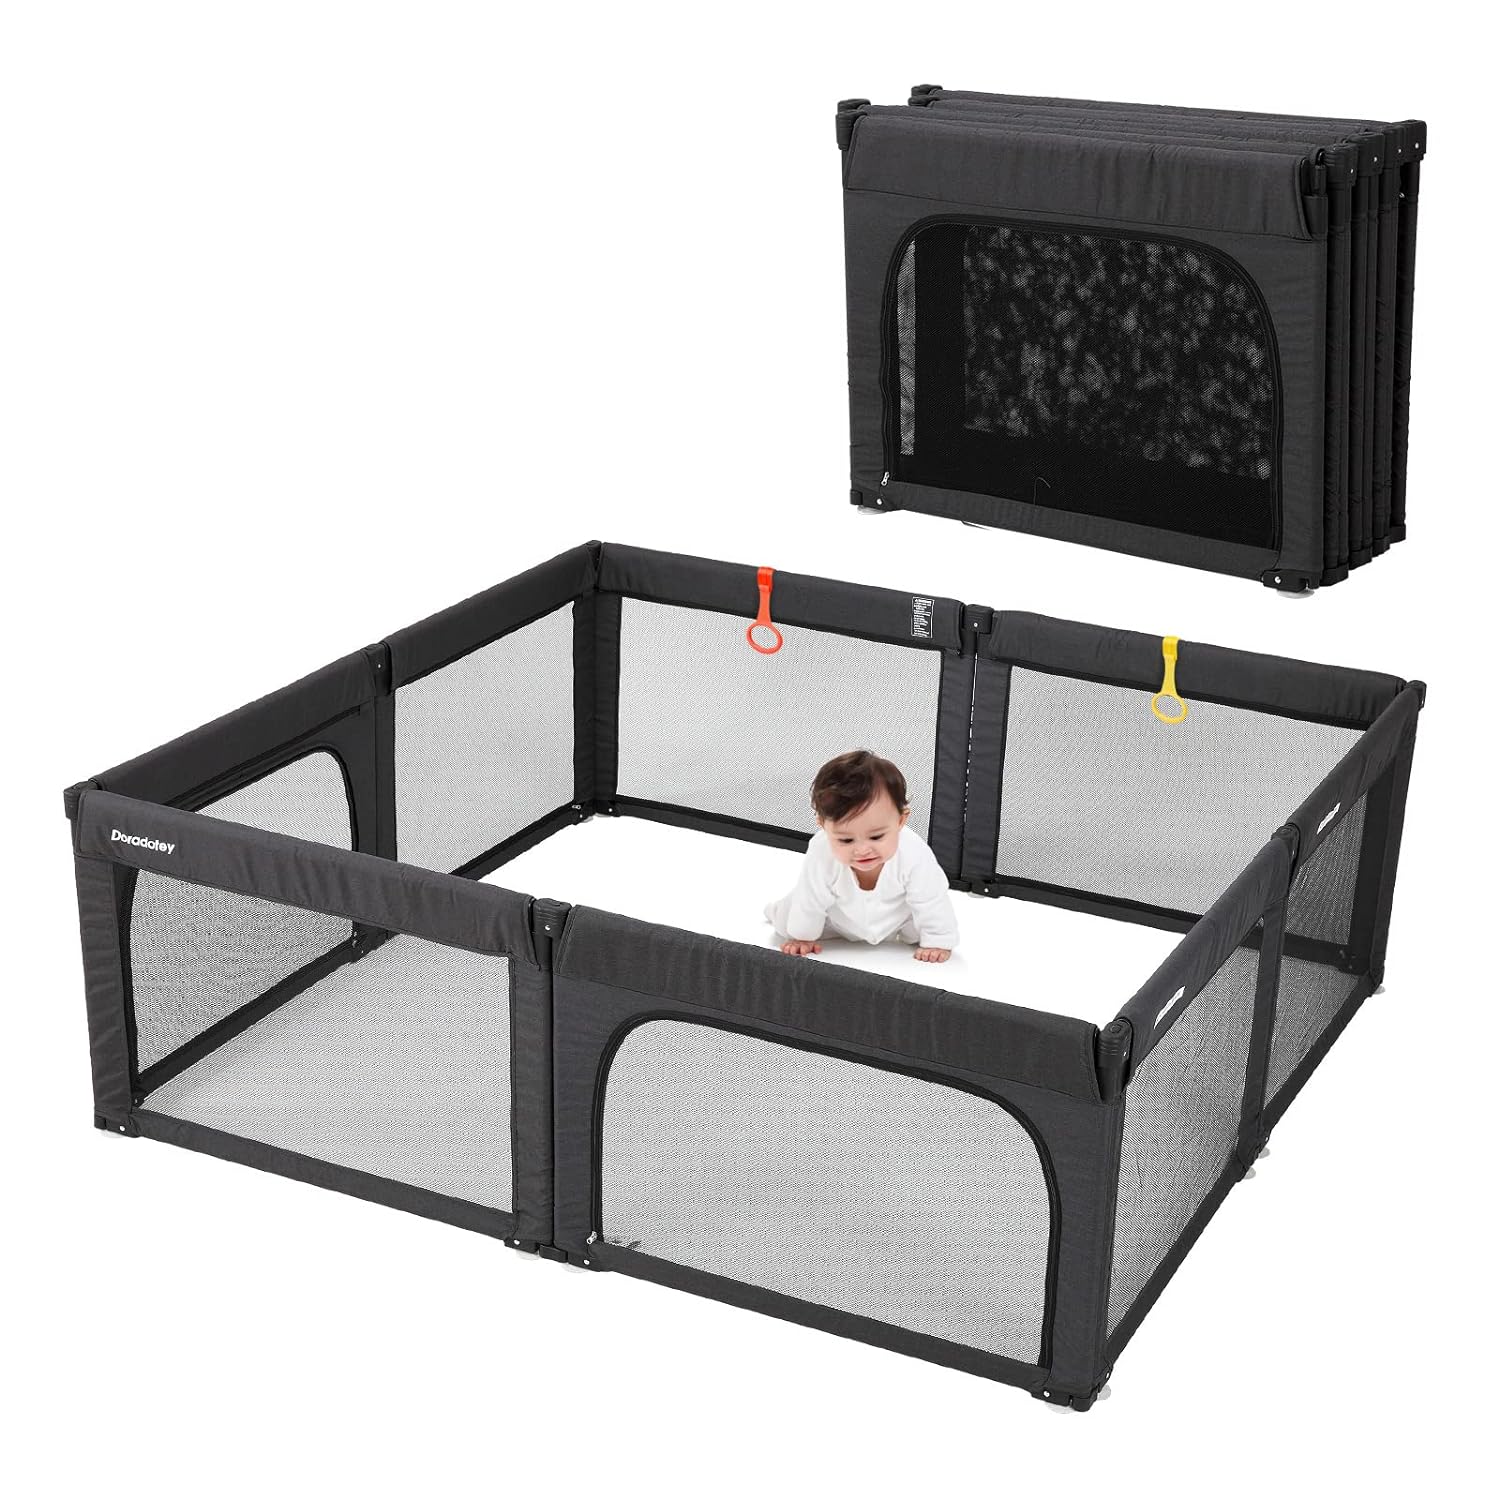 2-Colour Foldable Playpen 7-Panel Portable Playard Play Pen for Infants/Safety Lock and Carry Case Easily Opens with 1 Hand